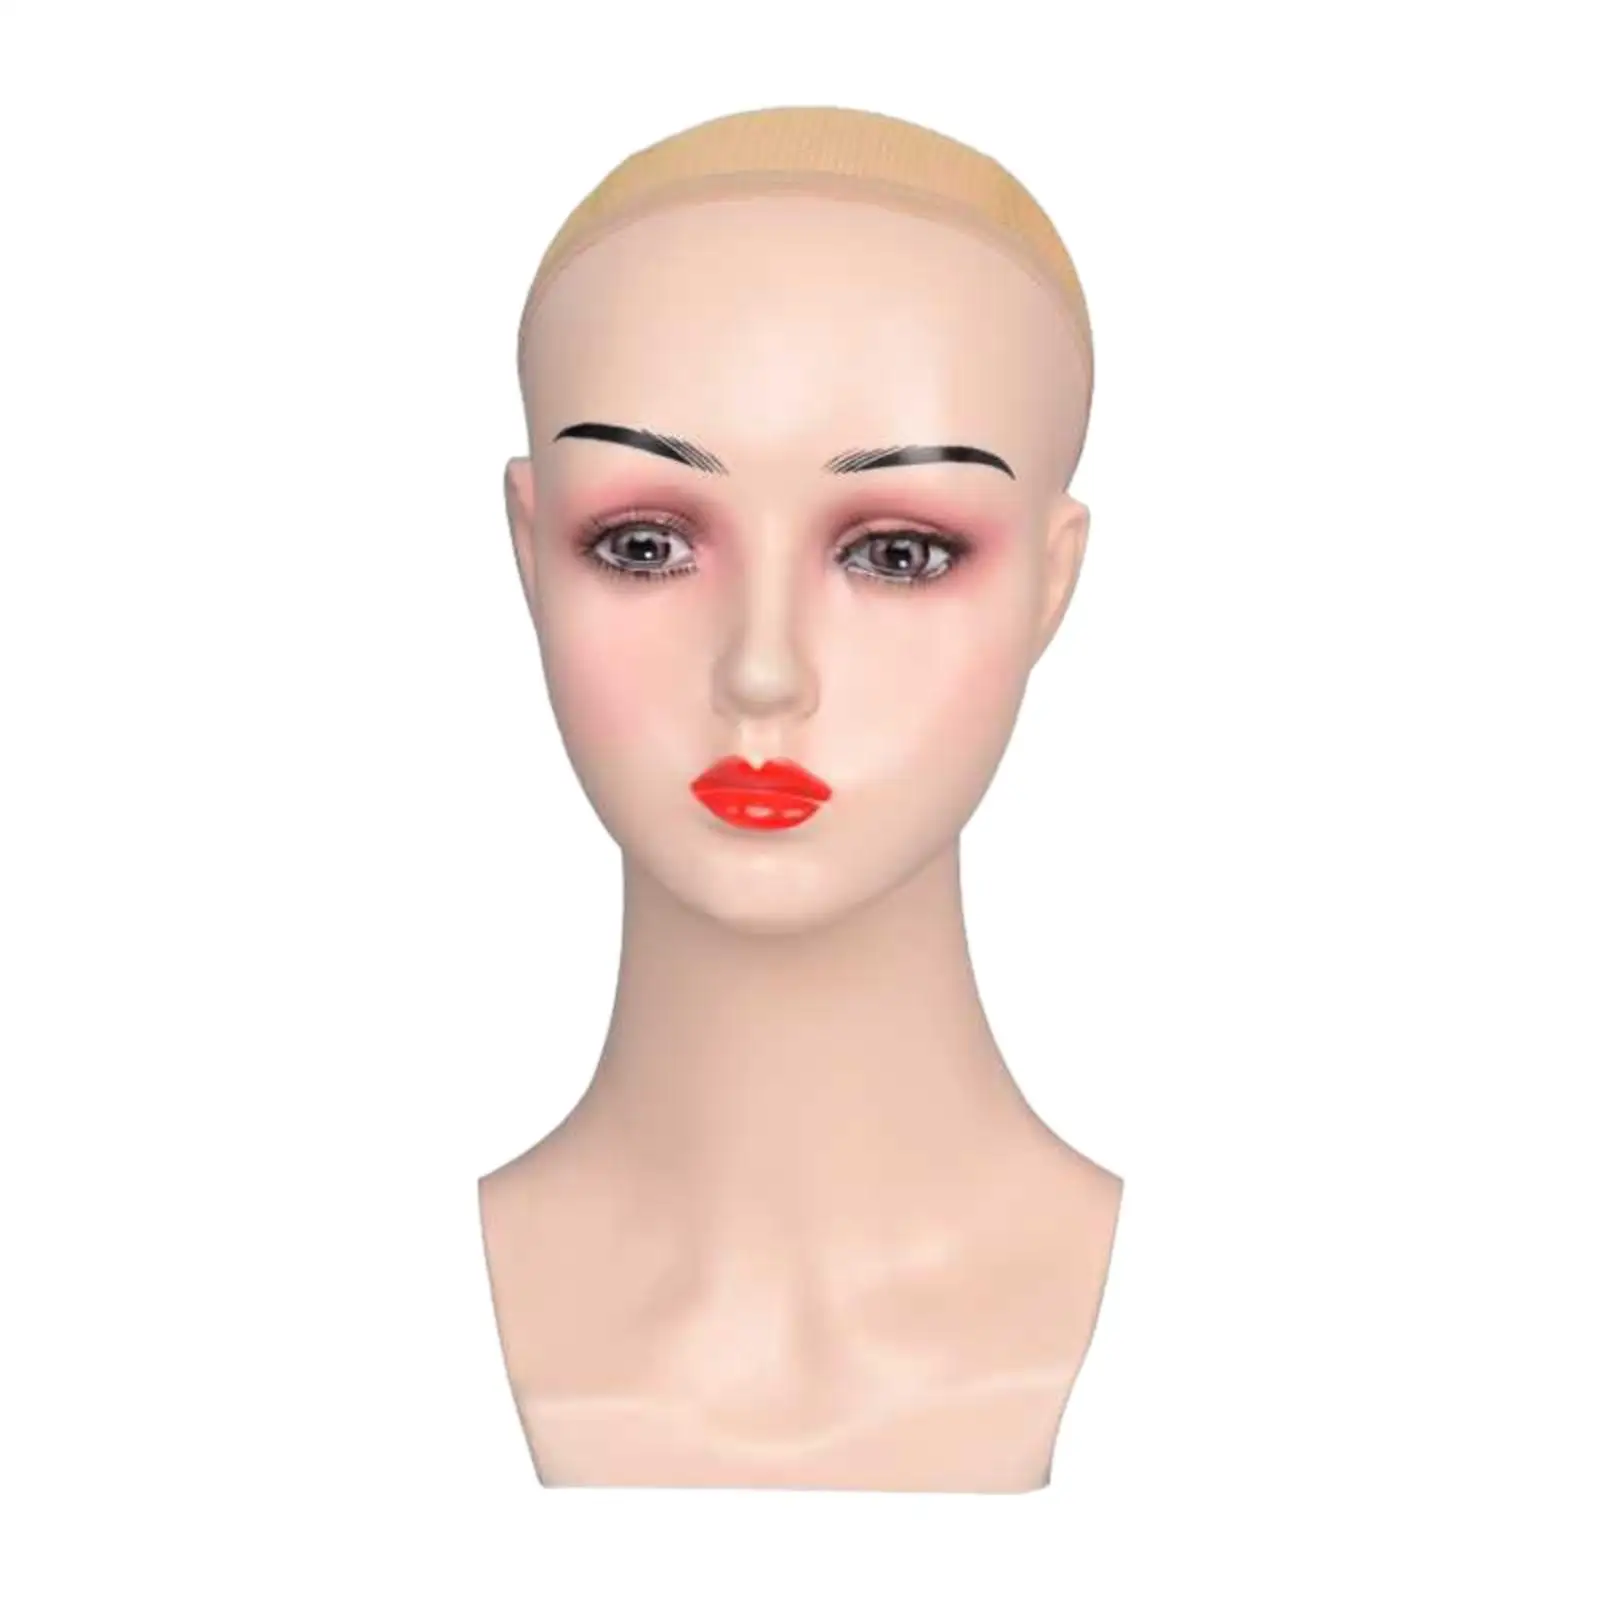 Female Wig Head Mannequin Realistic with Makeup Hat Display Rack Manikin for Wigs Making Styling Glasses Hats